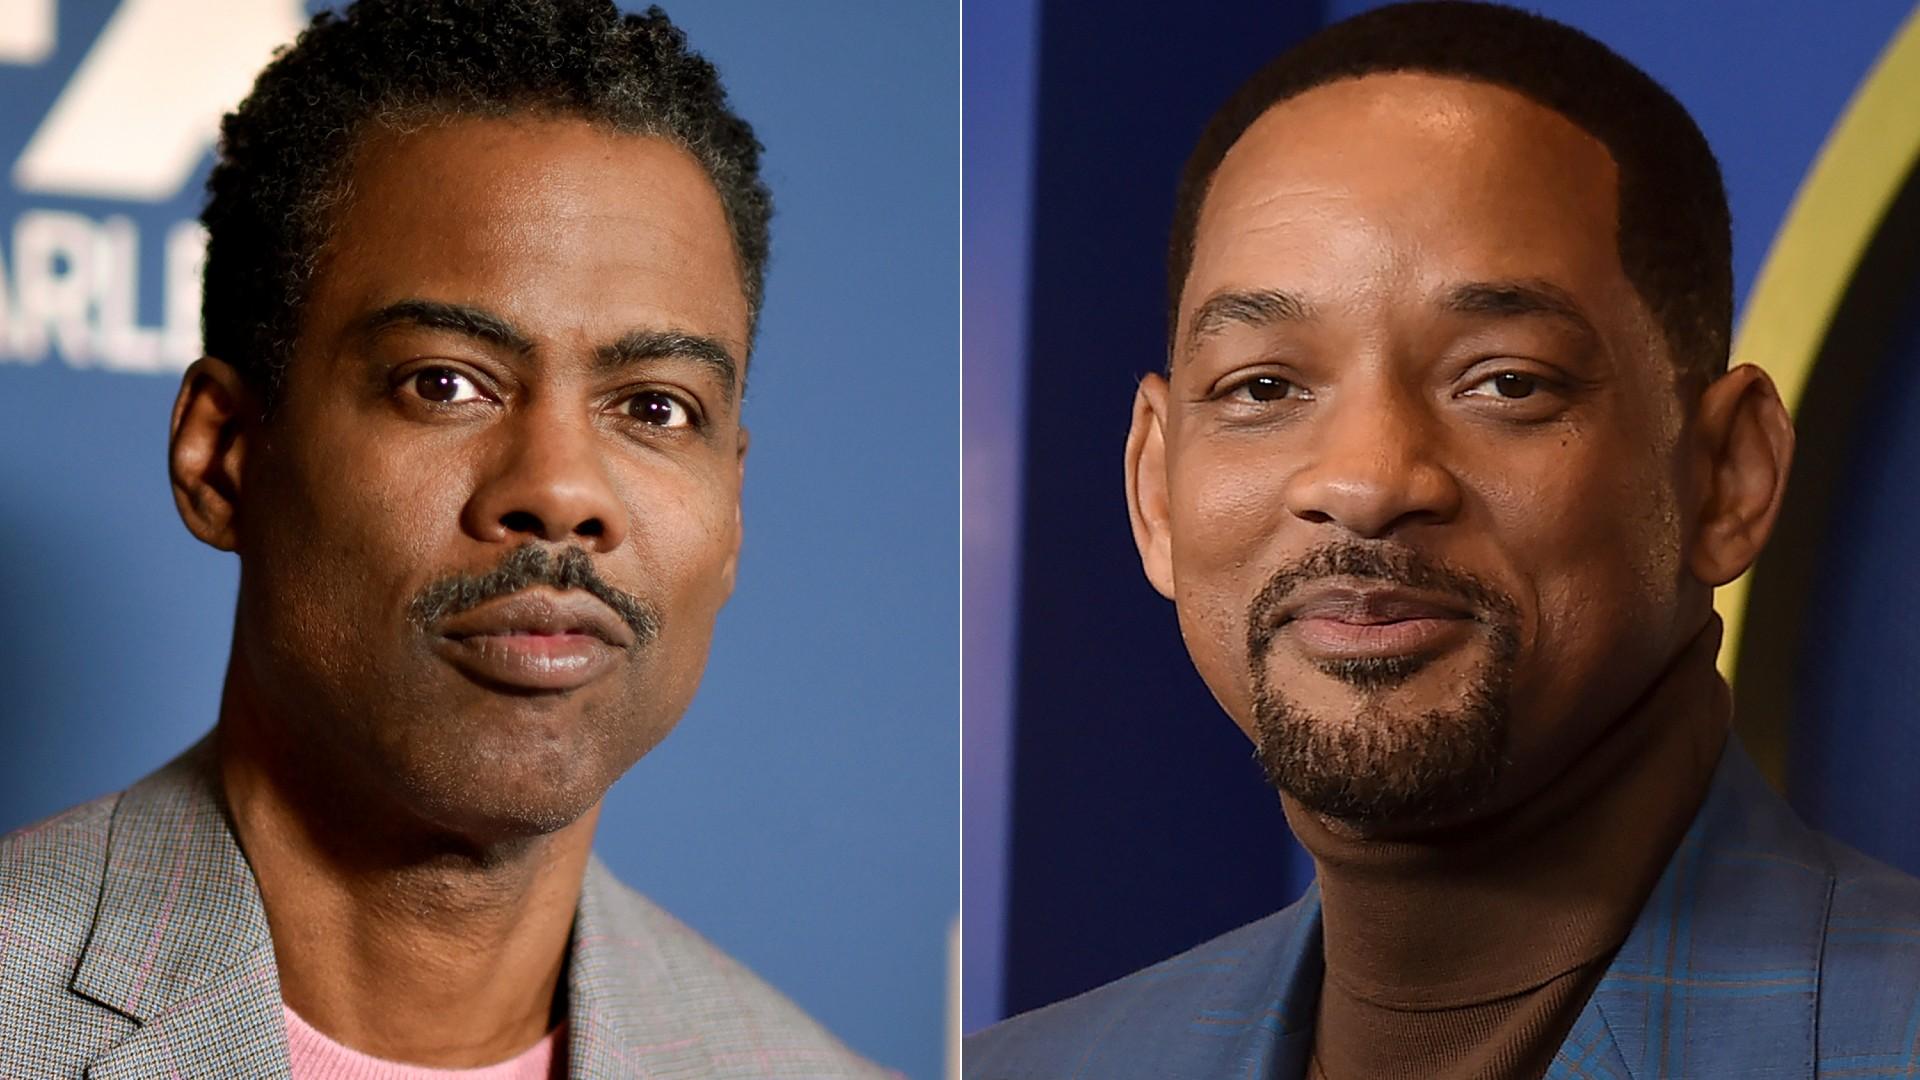 In this combo of file photos, Chris Rock, left, appears at the FX portion of the Television Critics Association Winter press tour in Pasadena, Calif., on Jan. 9, 2020; and Will Smith appears at the 94th Academy Awards nominees luncheon in Los Angeles on March 7, 2022. (AP Photo / File)